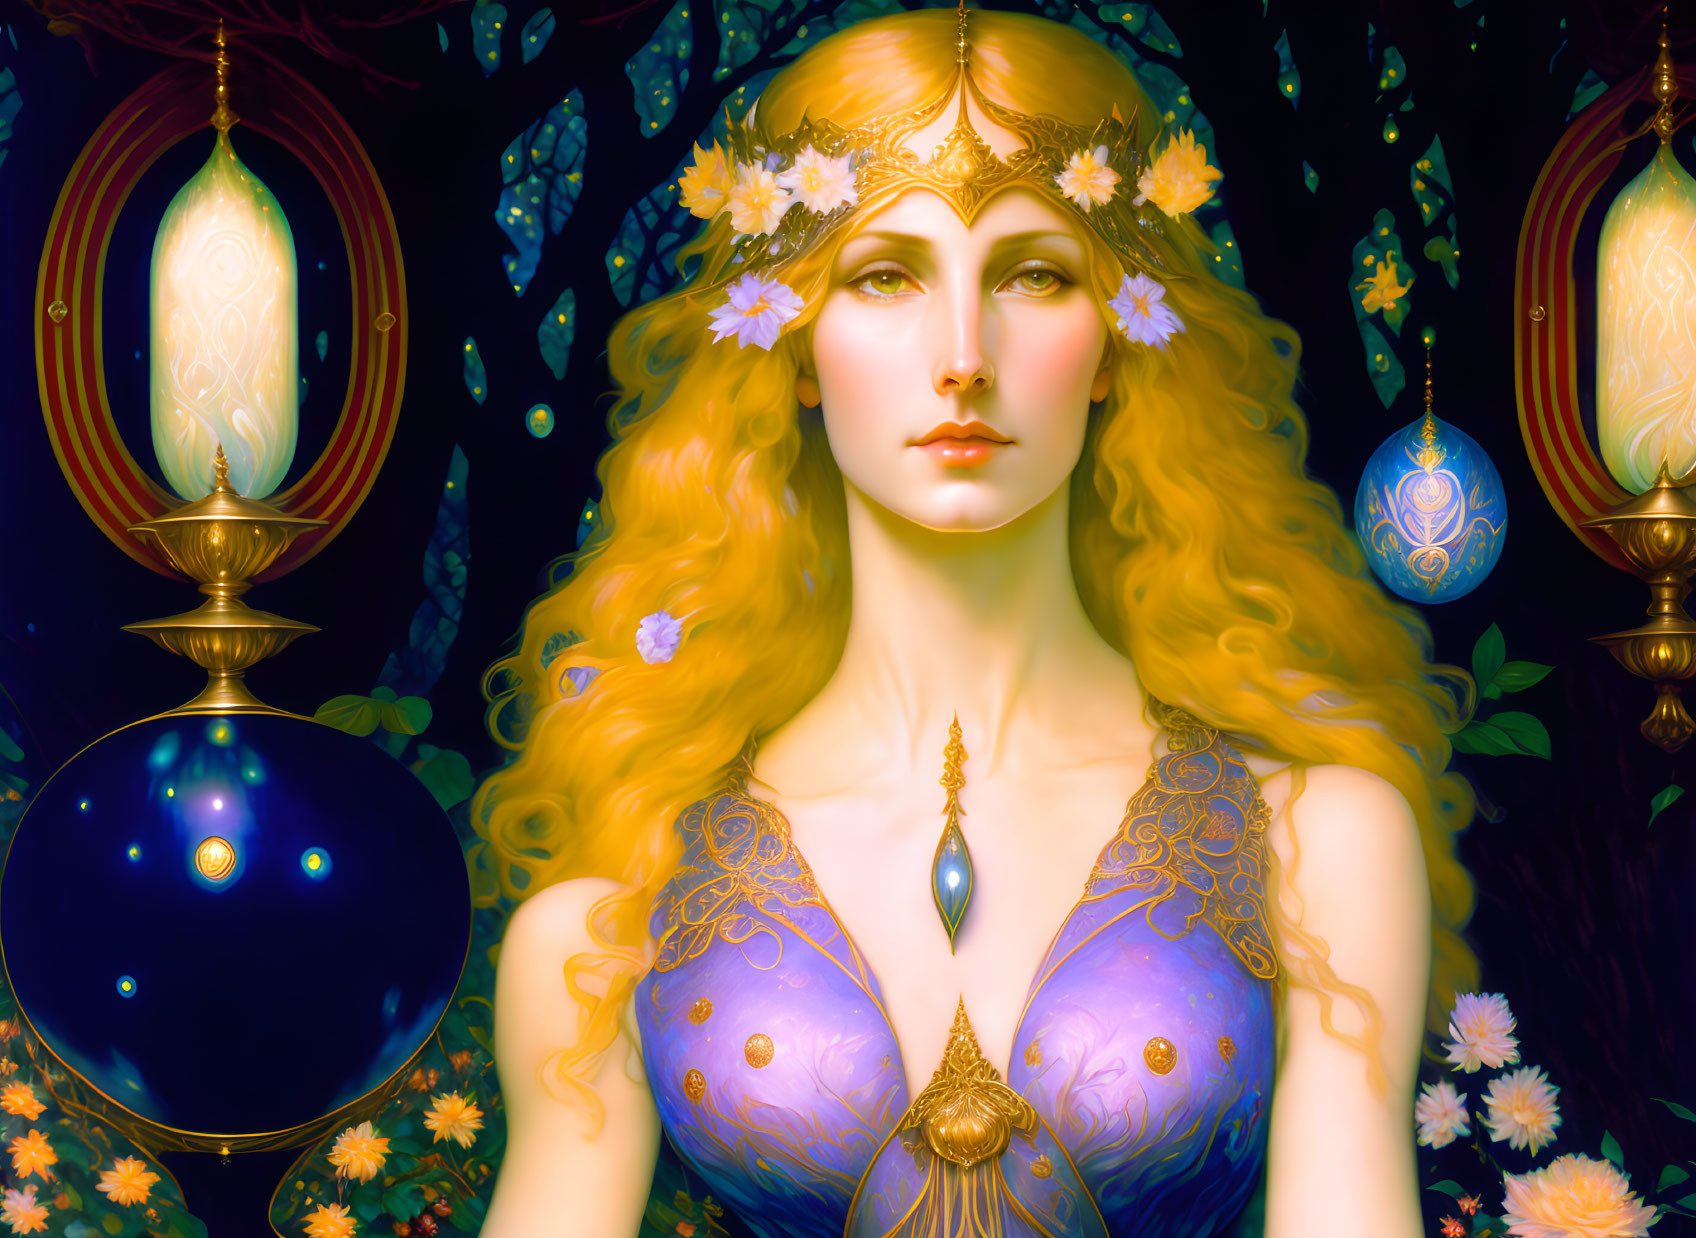 Golden-haired fantasy figure in violet attire among mystical forest with orbs and lanterns